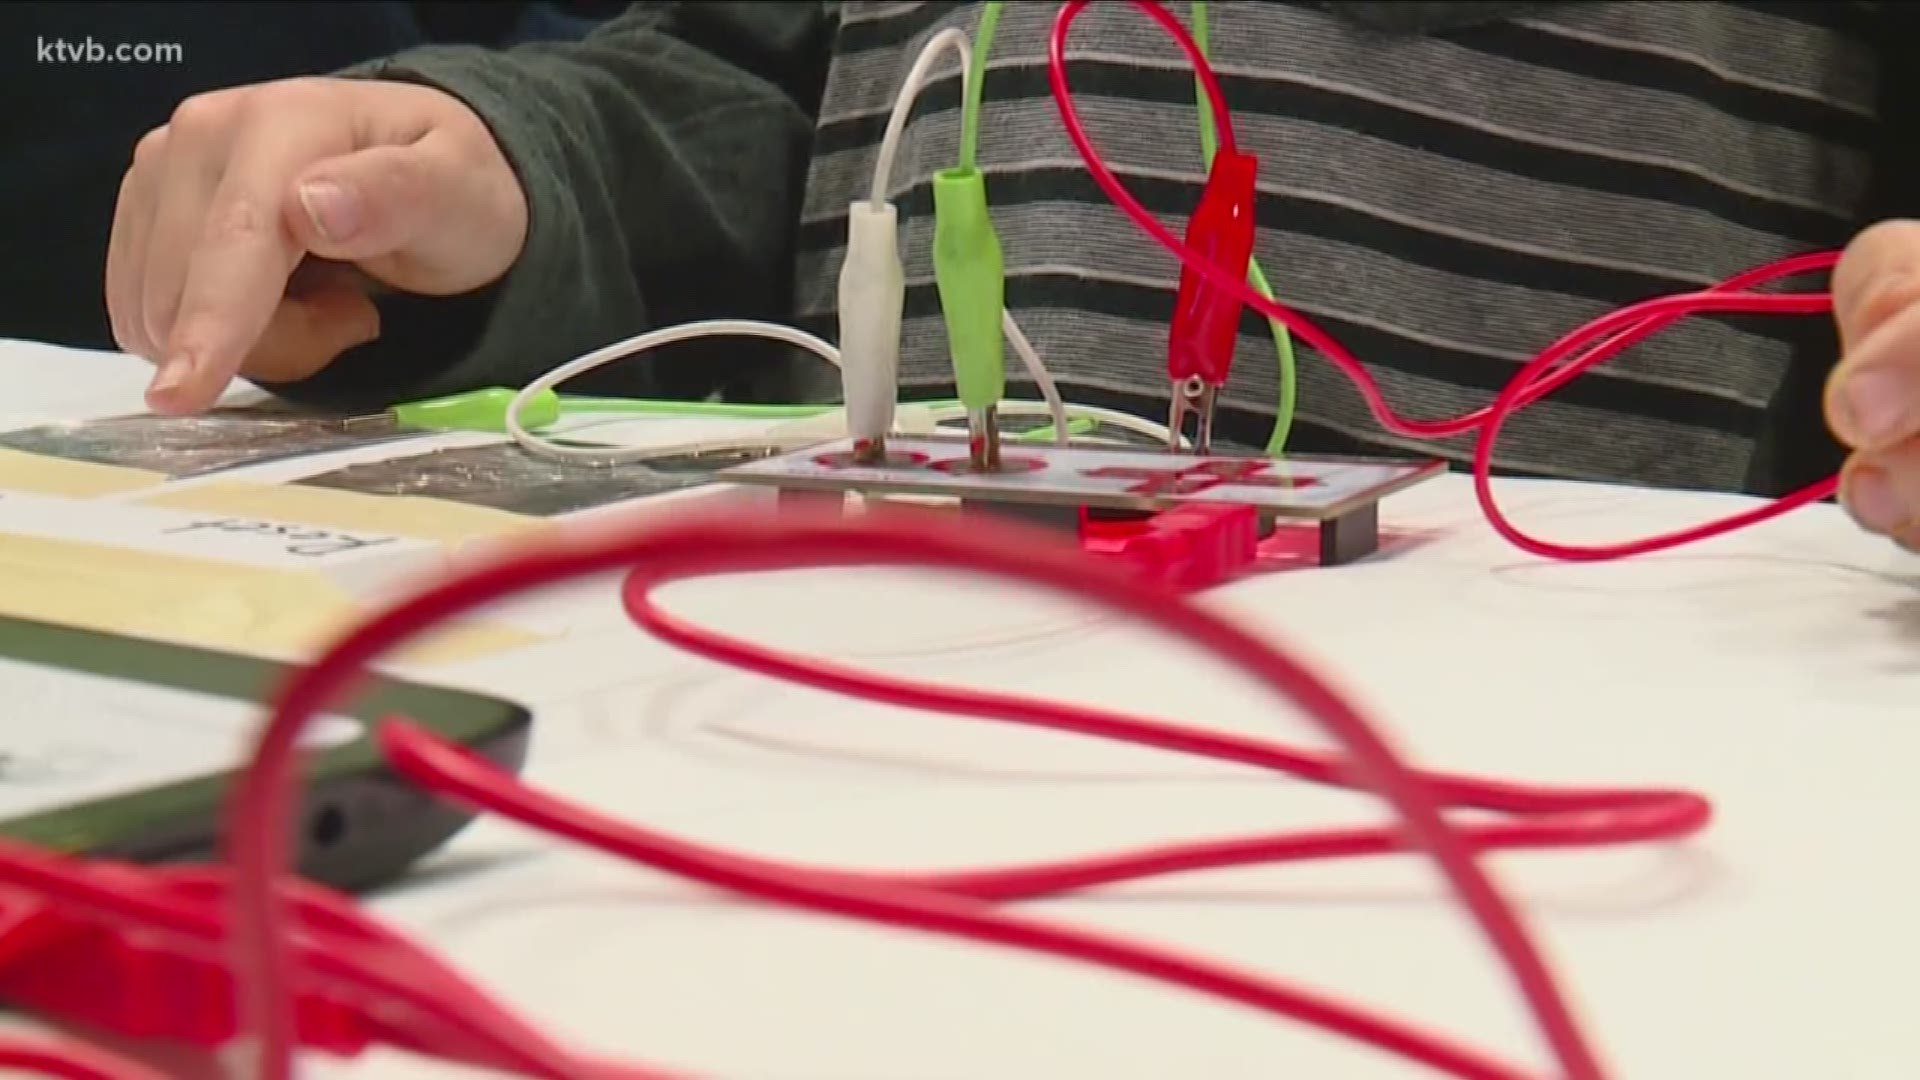 Boise State staff hope that the event will encourage children to pursue STEM careers that are in high demand across Idaho.